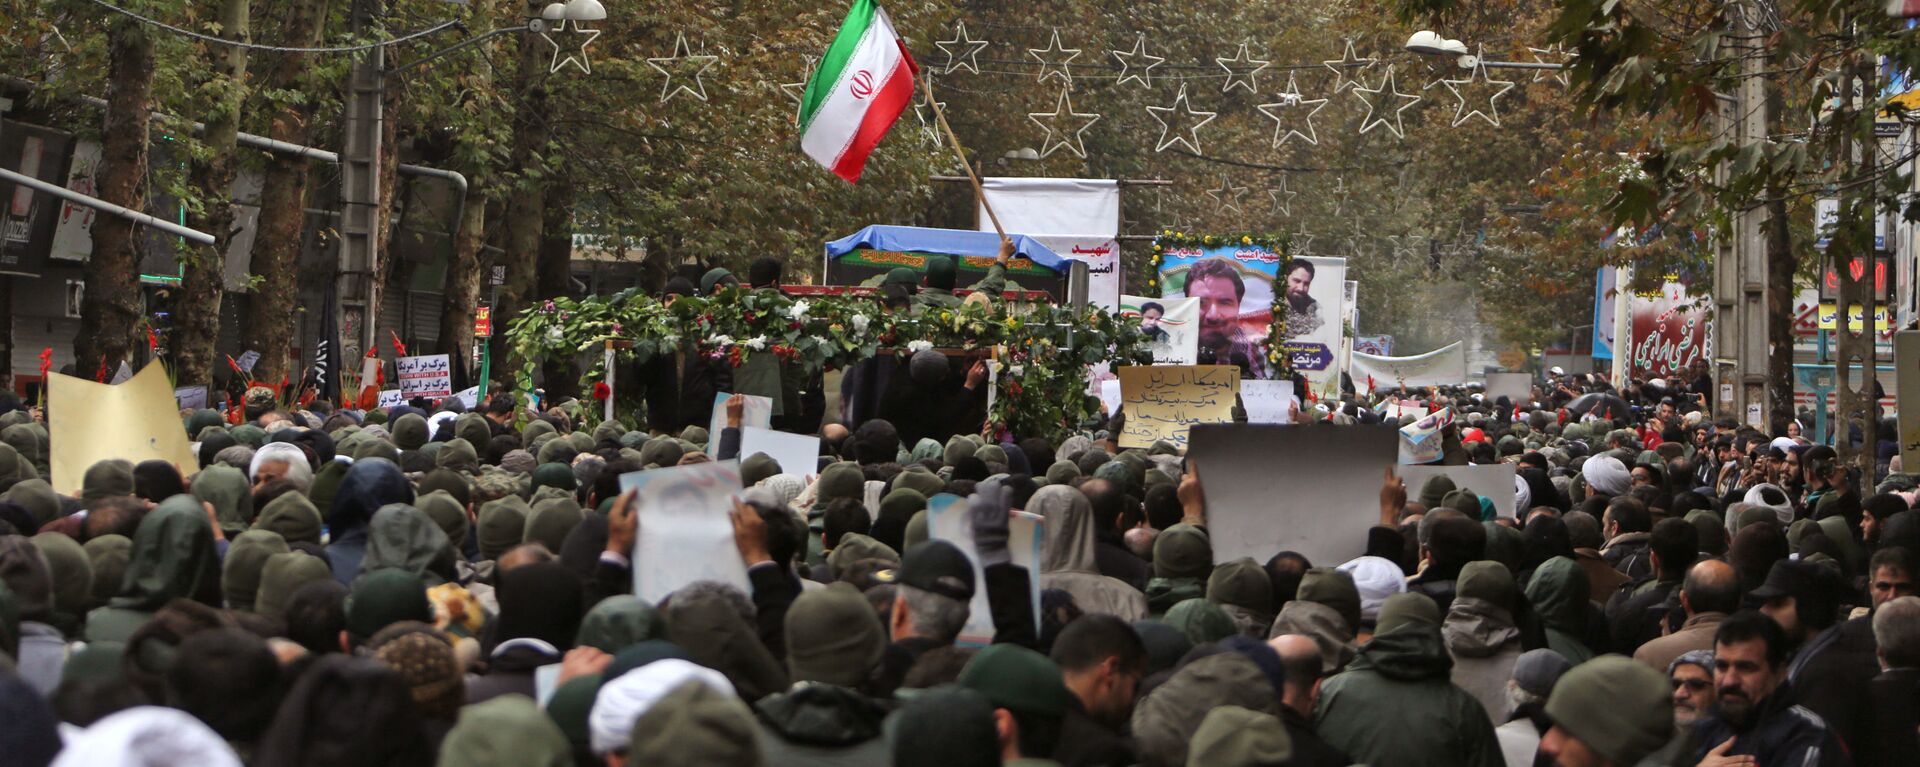 Iranian mourners attend the funeral of Morteza Ebrahimi, a commander of the Islamic Revolutionary Guard Corps, who was killed in violent demonstrations that erupted across Iran last week against a surprise petrol price hike, on November 20, 2019 in the central Iranian city of Shahriar. - Sputnik International, 1920, 26.10.2022